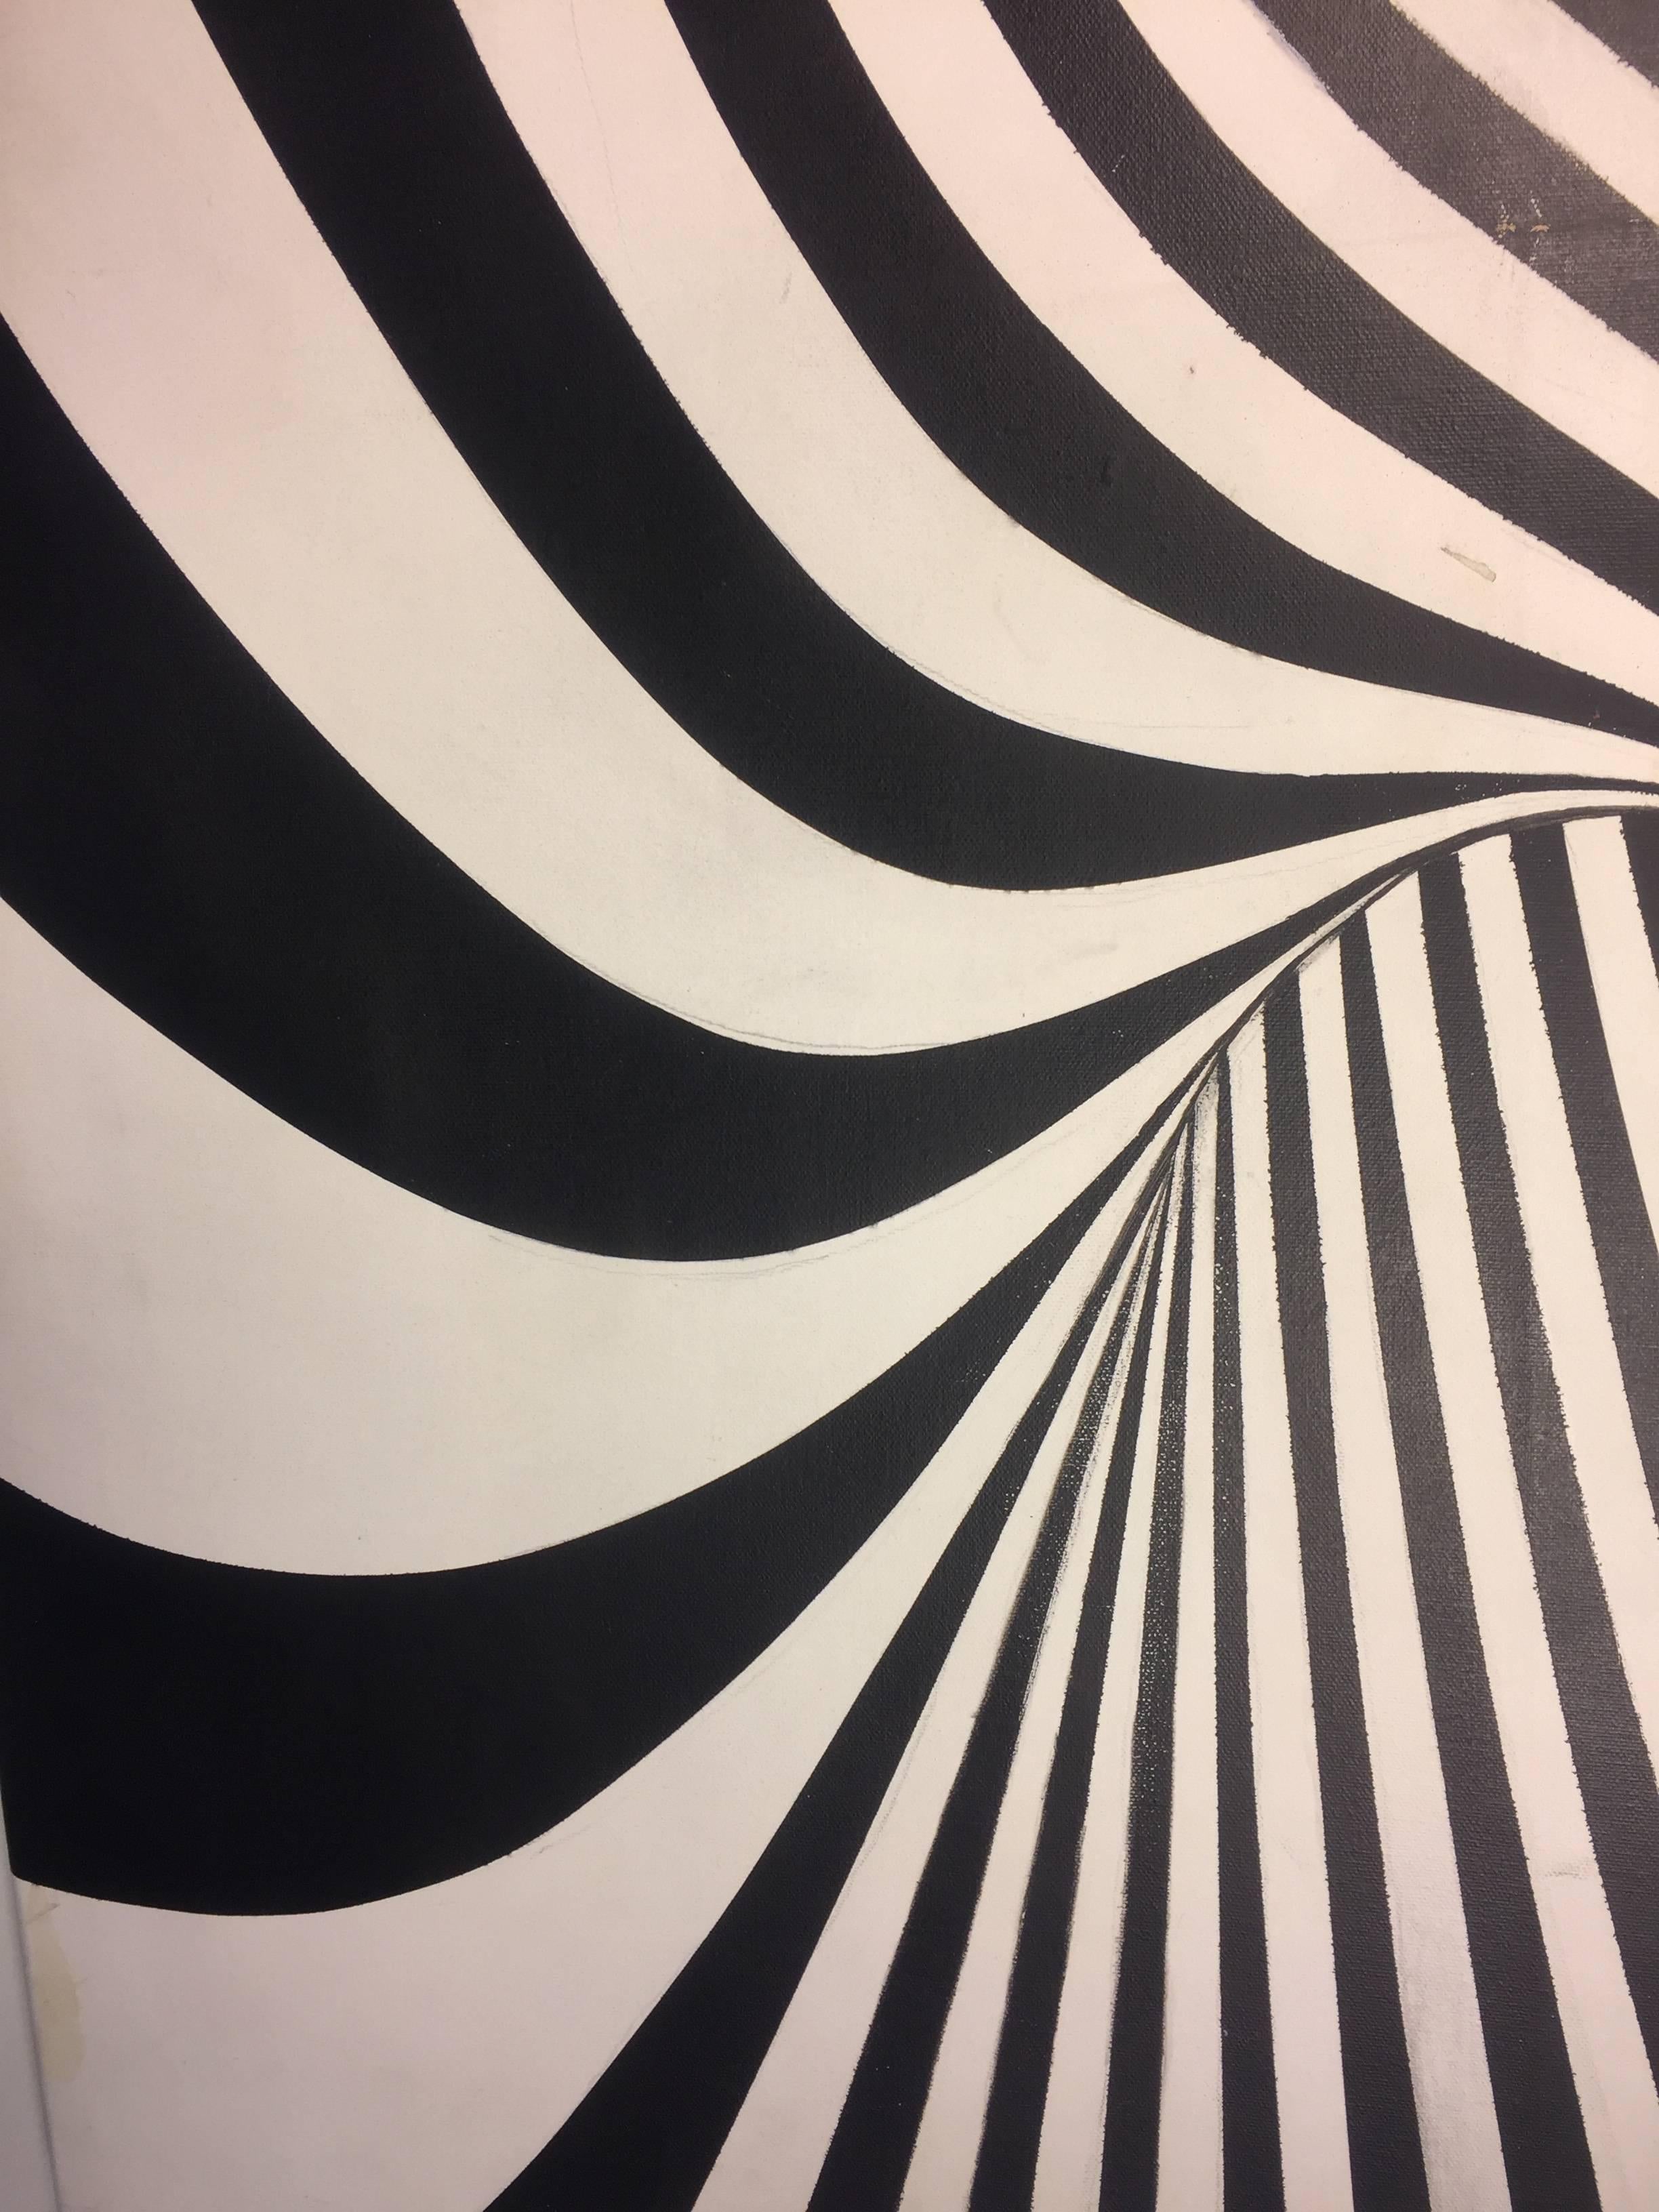 American Dramatic Op Art Zebra Pattern Painting in the Manner of Victor Vasarely For Sale